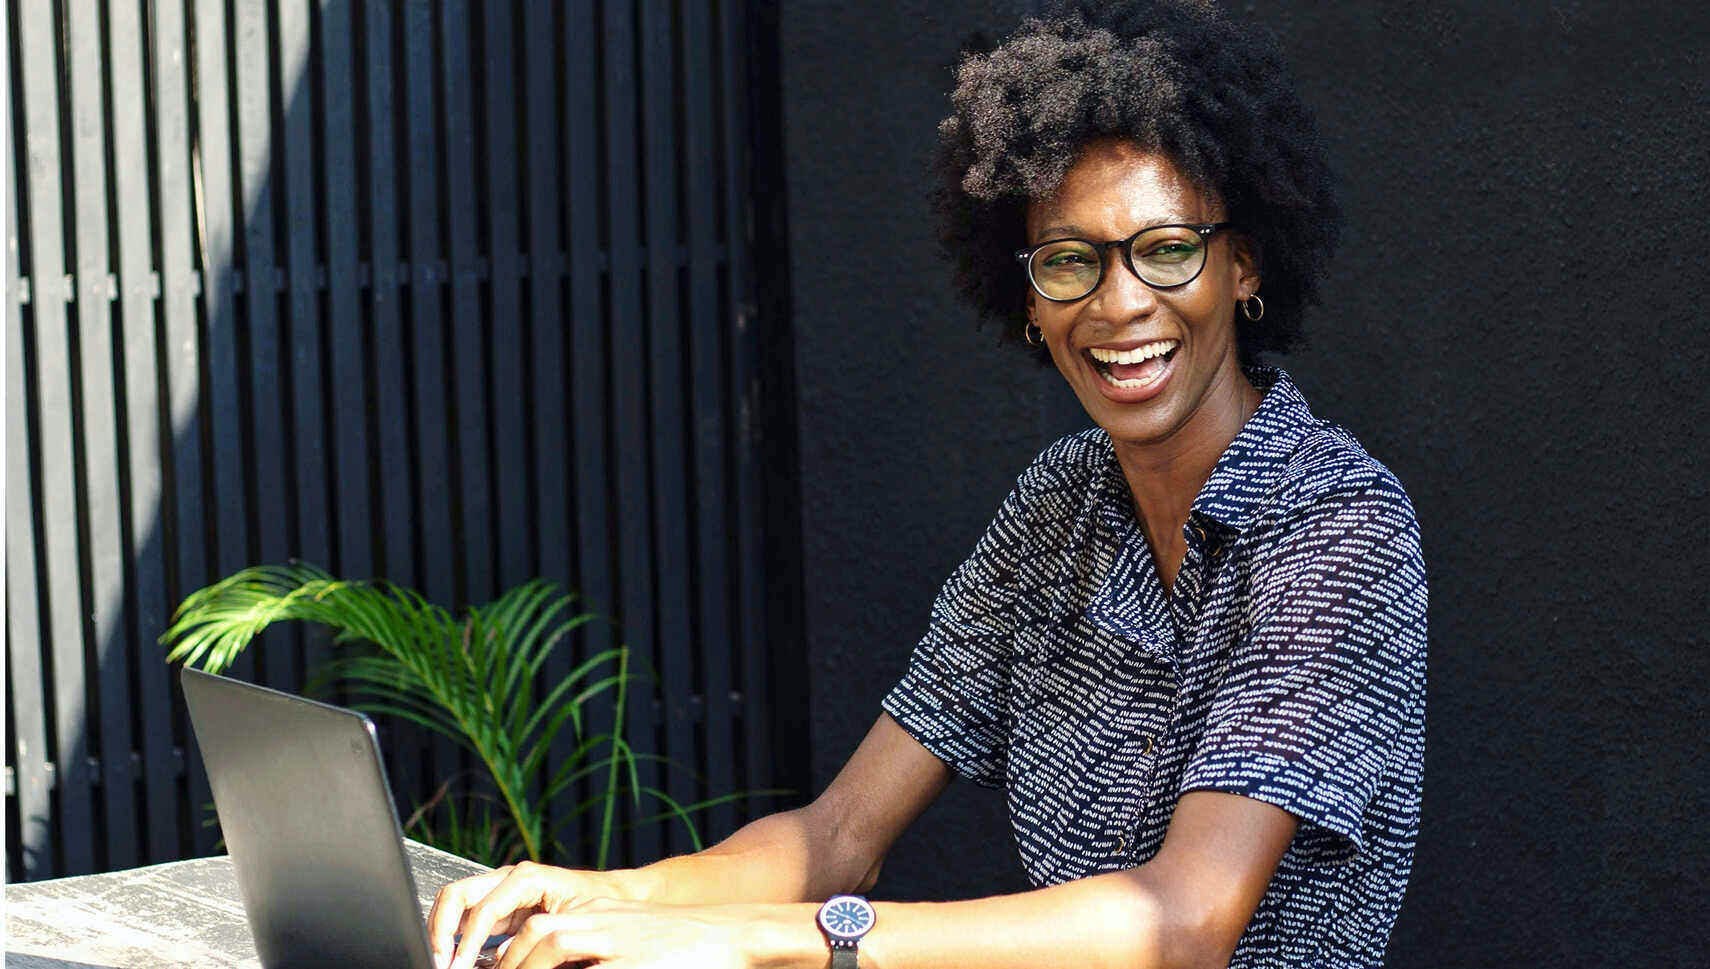 Akua smiling in front of a laptop